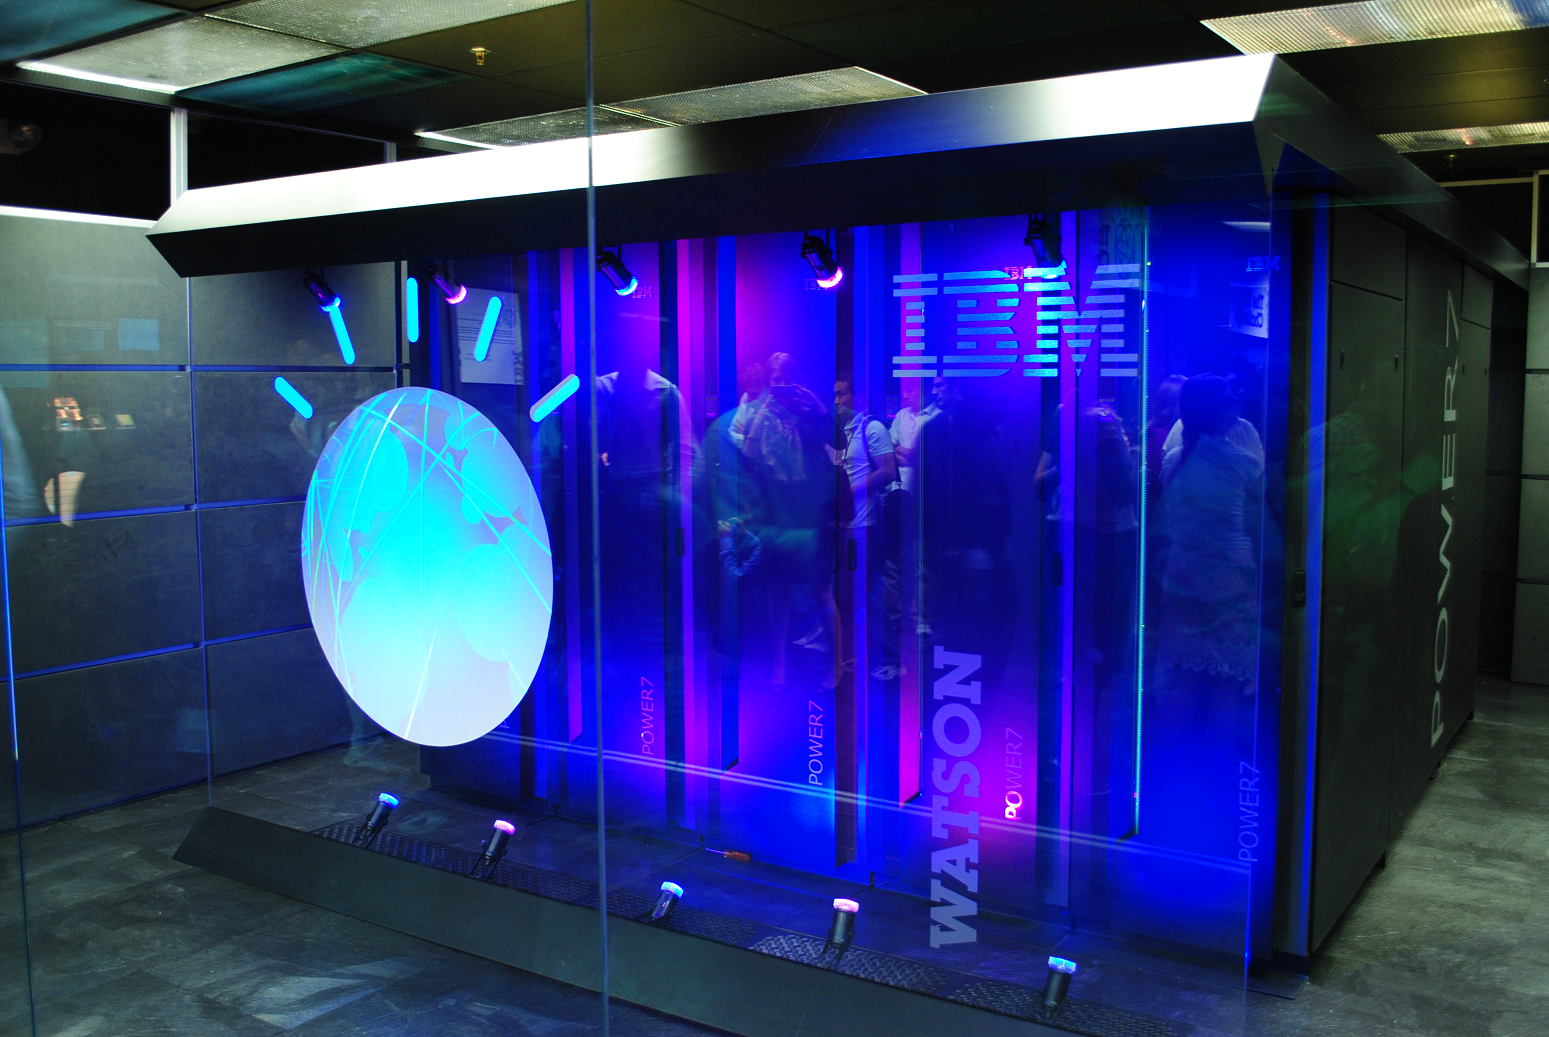 MIT and IBM are teaming up to build a $240 million AI research lab and business incubator